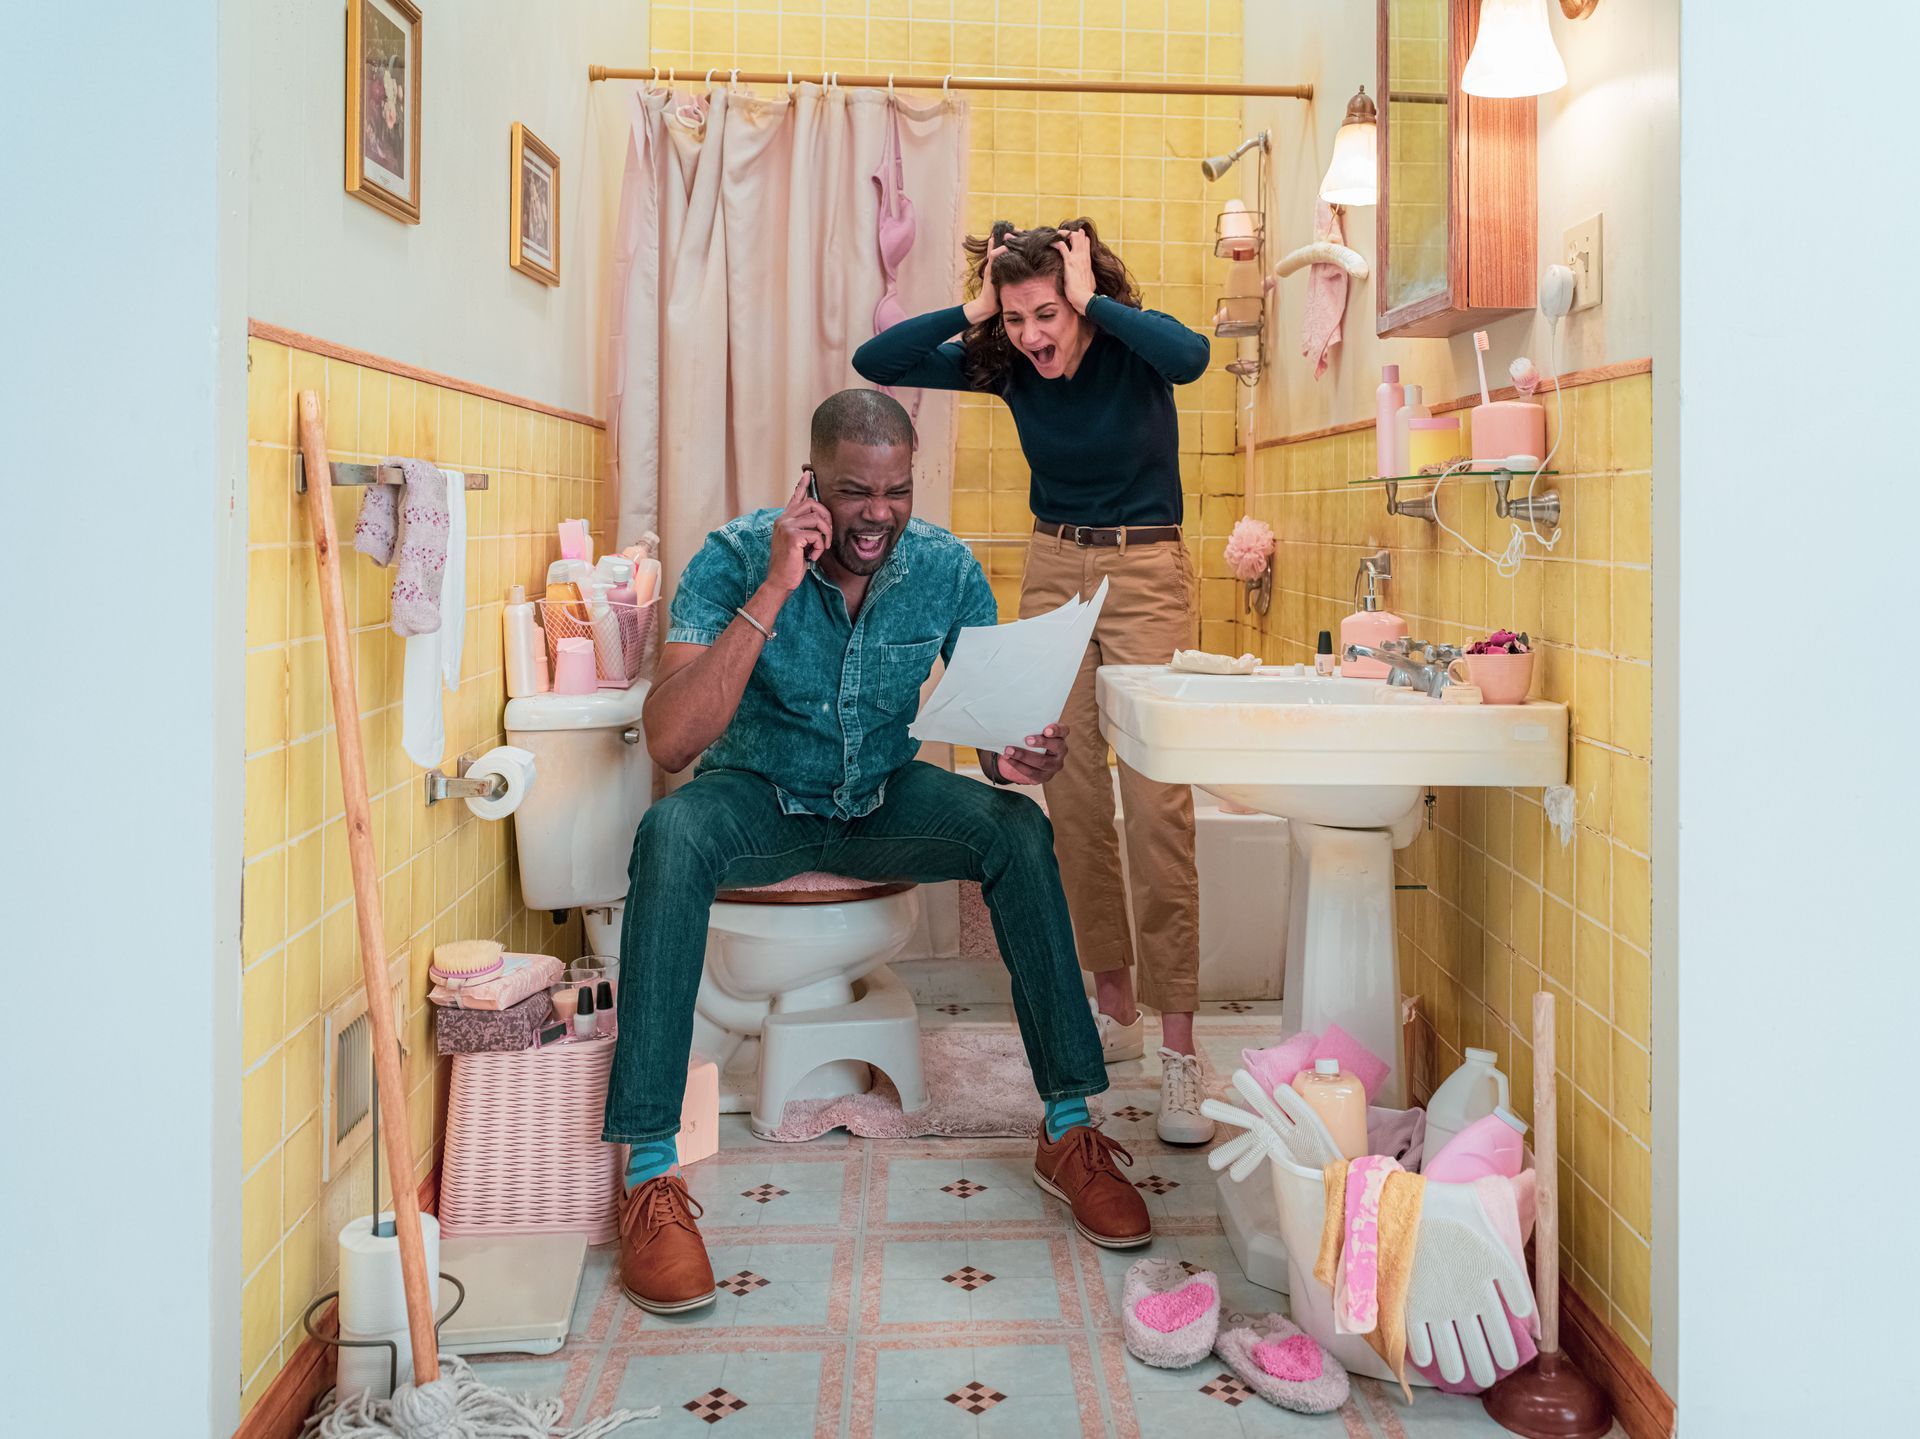 A man is sitting on a toilet in a bathroom while a woman stands behind him.